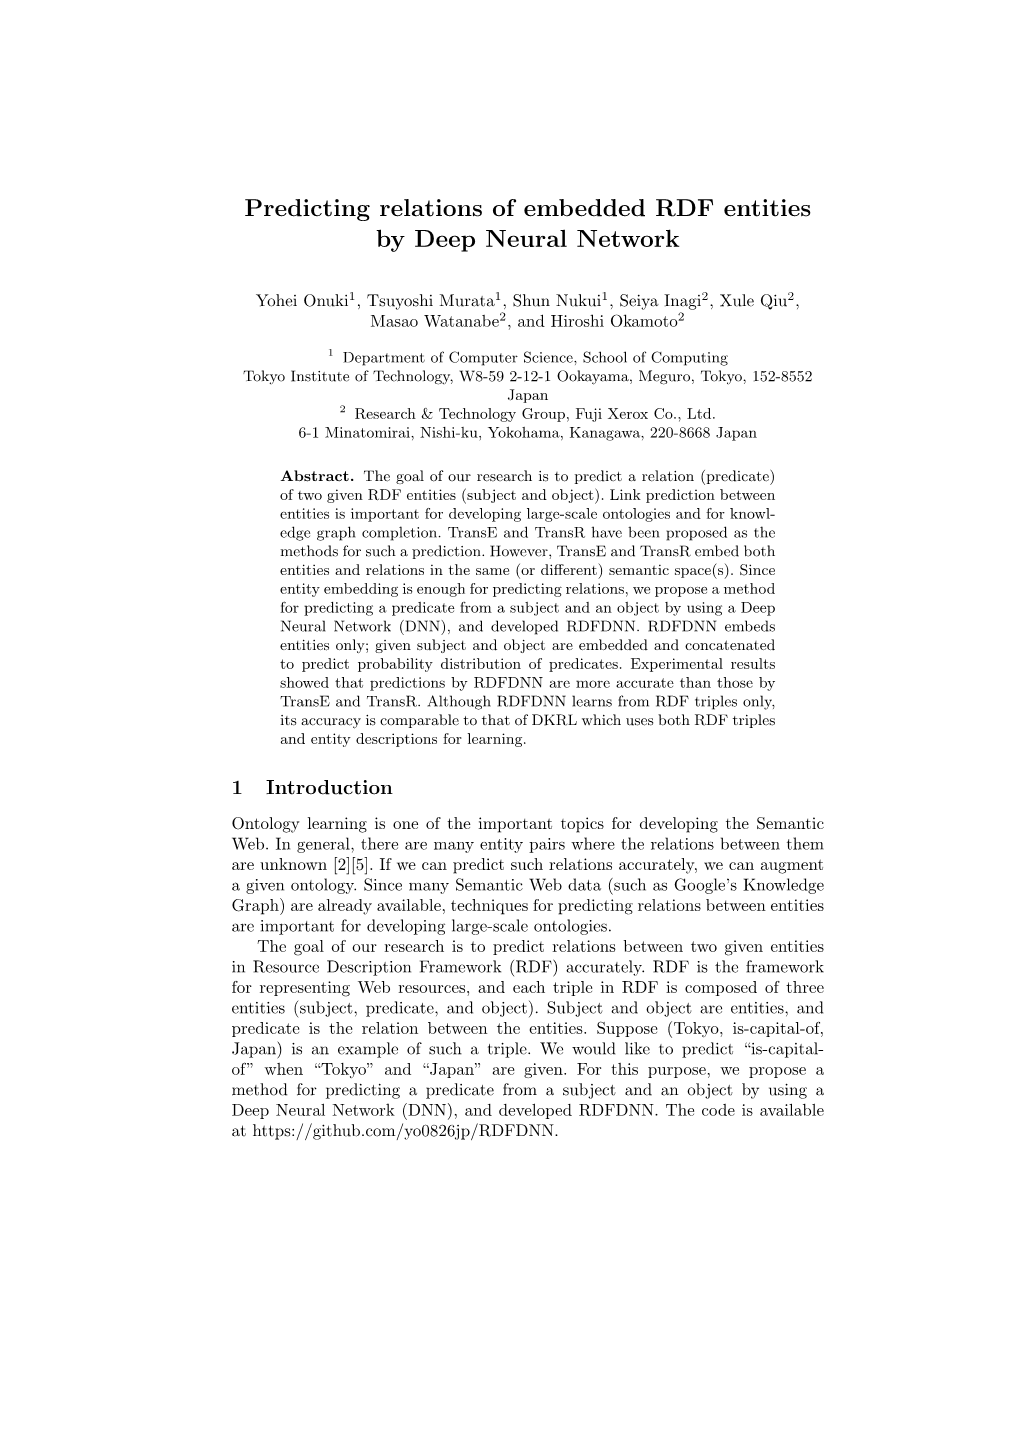 Predicting Relations of Embedded RDF Entities by Deep Neural Network